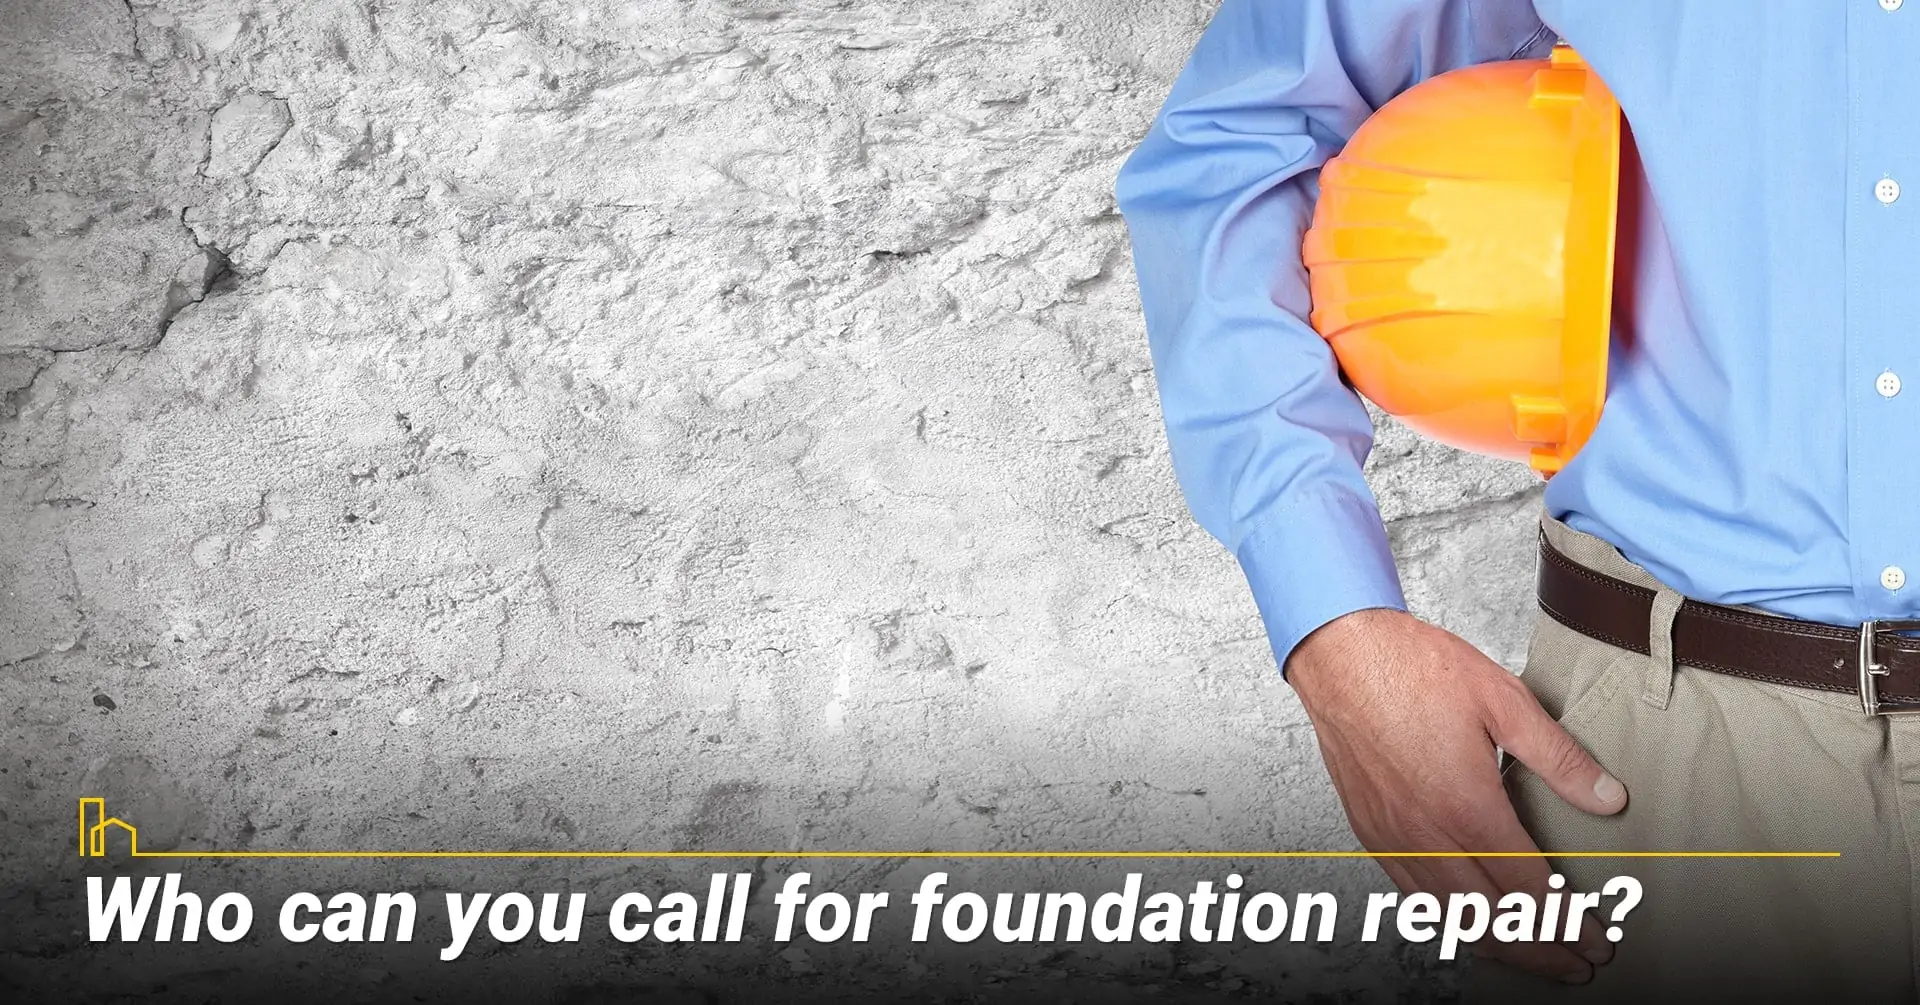 Who can you call for foundation repair? look for contractor